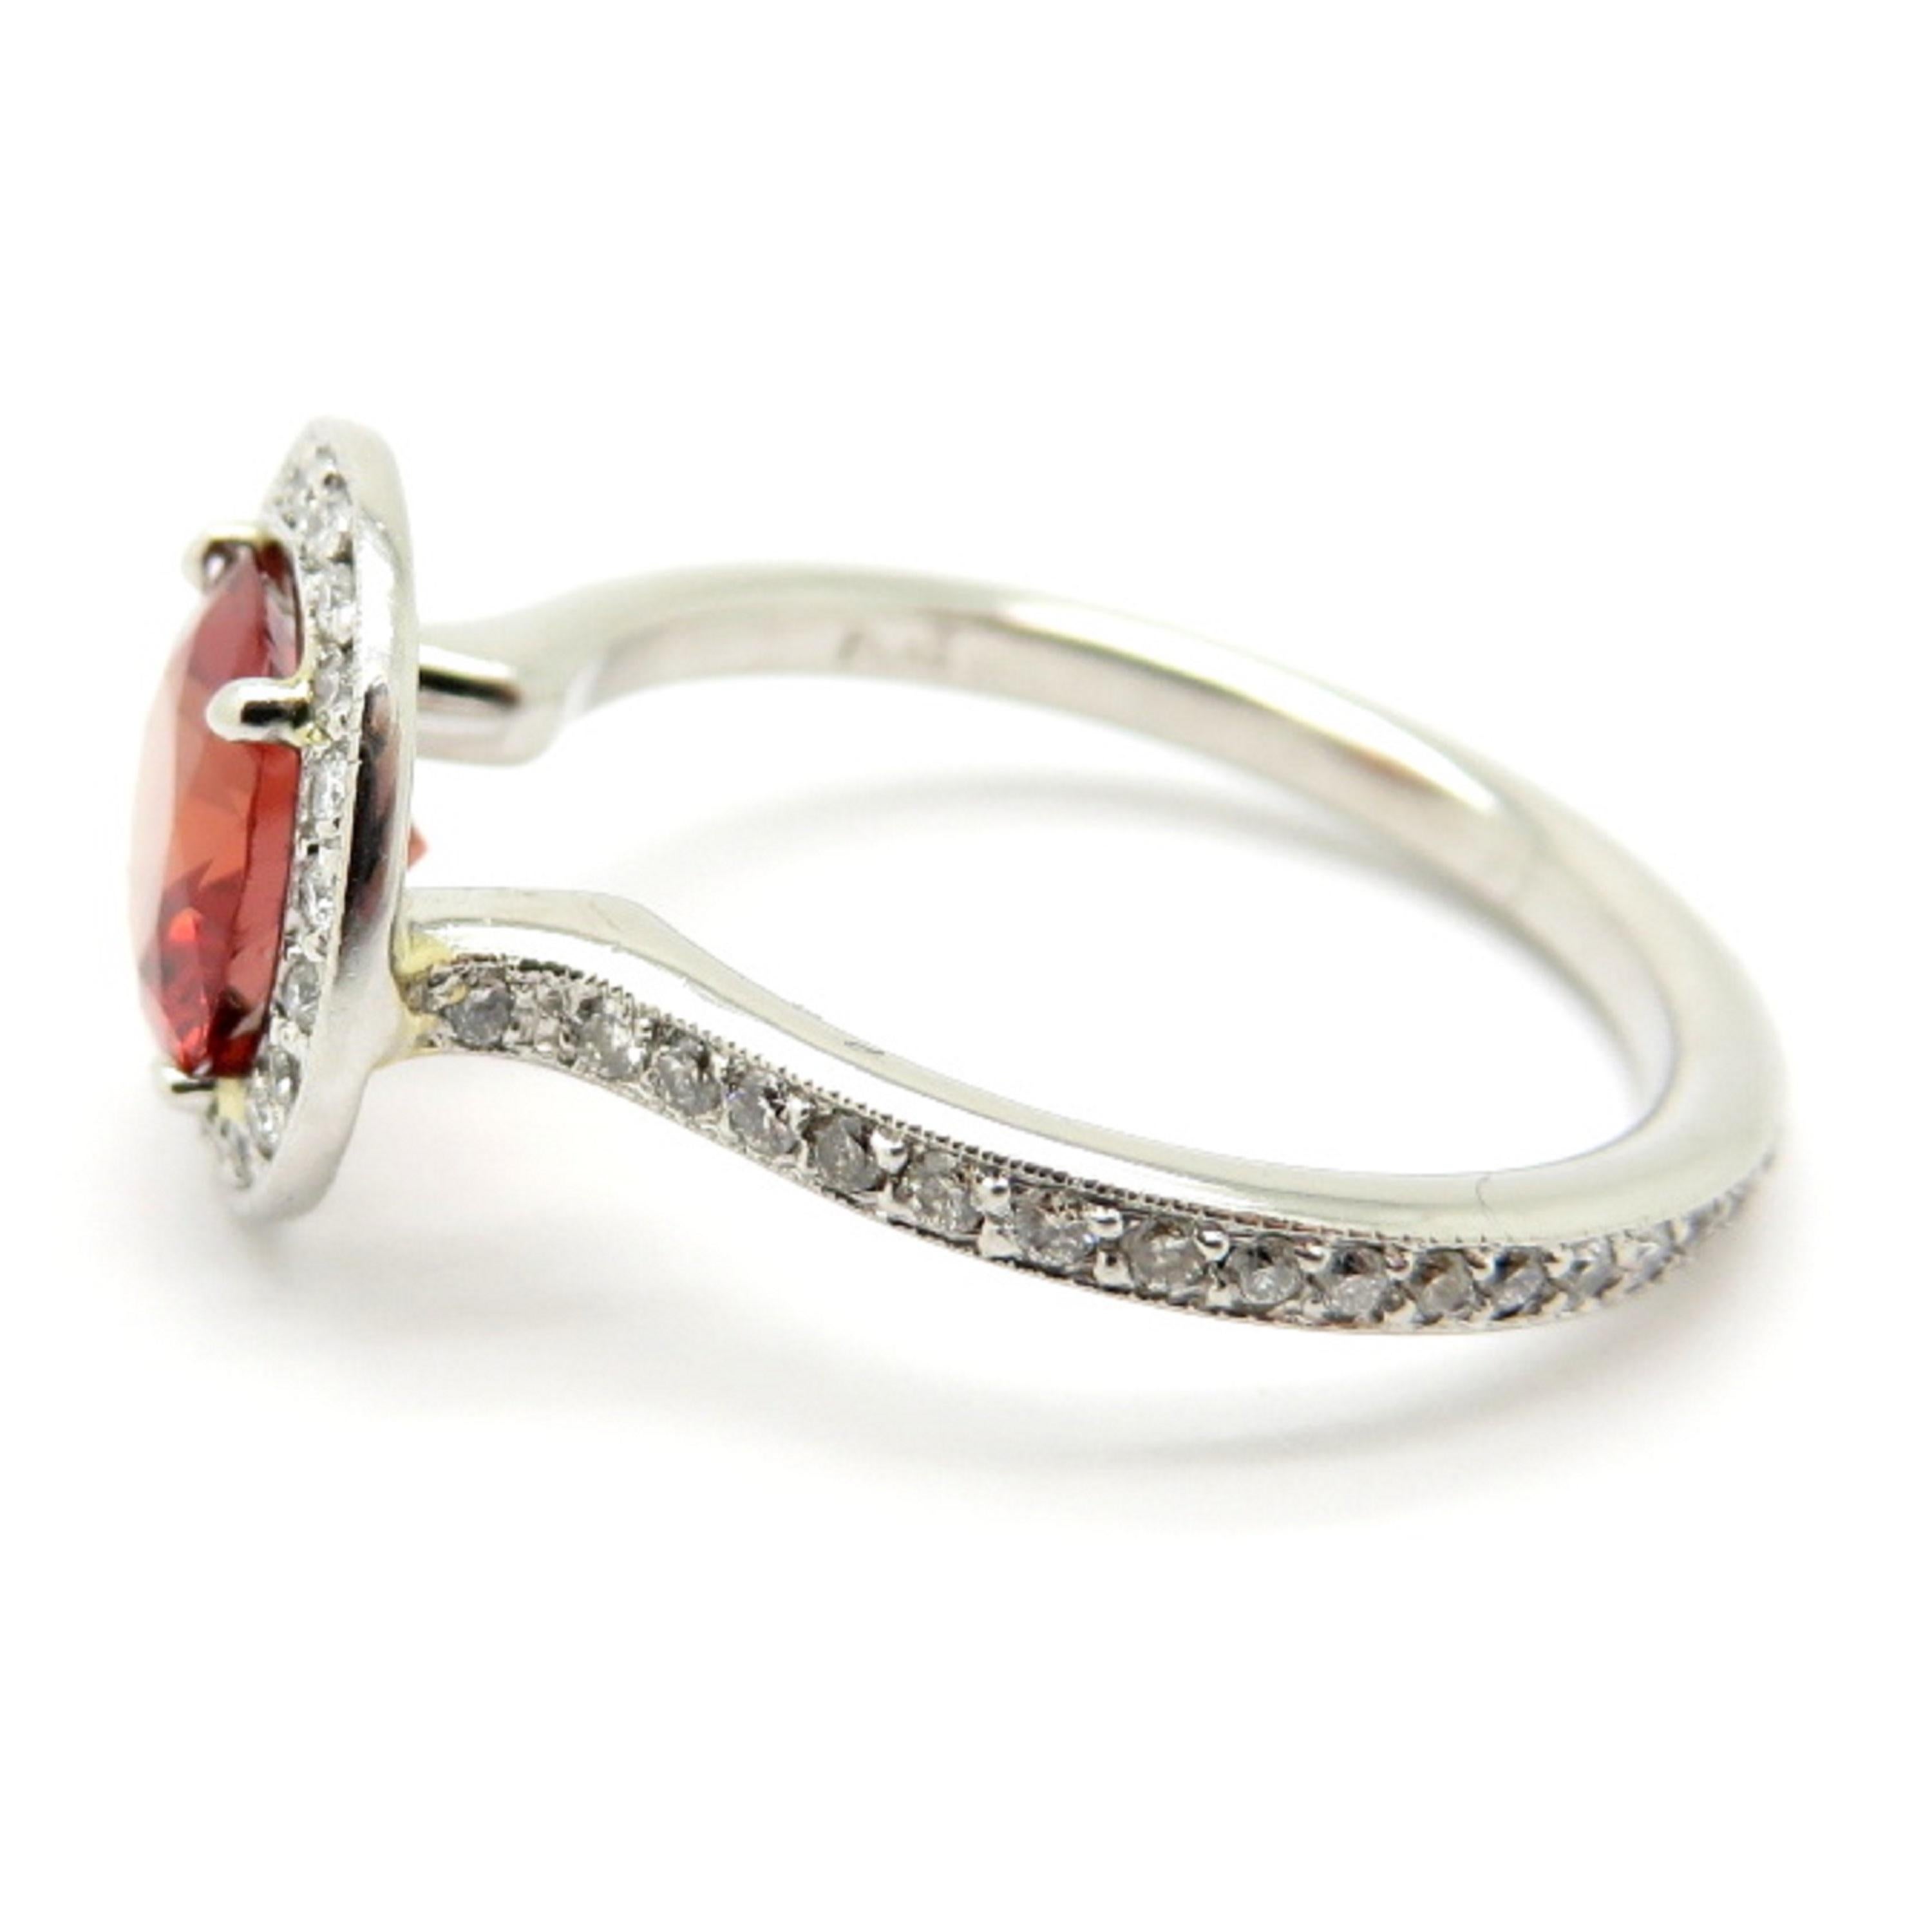 For sale is a stunning GIA Certified Red Spinel and Diamond Halo Platinum Ring!
Showcasing one (1) Near-Round shaped Brilliant Cut Reddish Orange natural Spinel with no indications of heat treatment.  
Weighing approximately 1.59 carats and